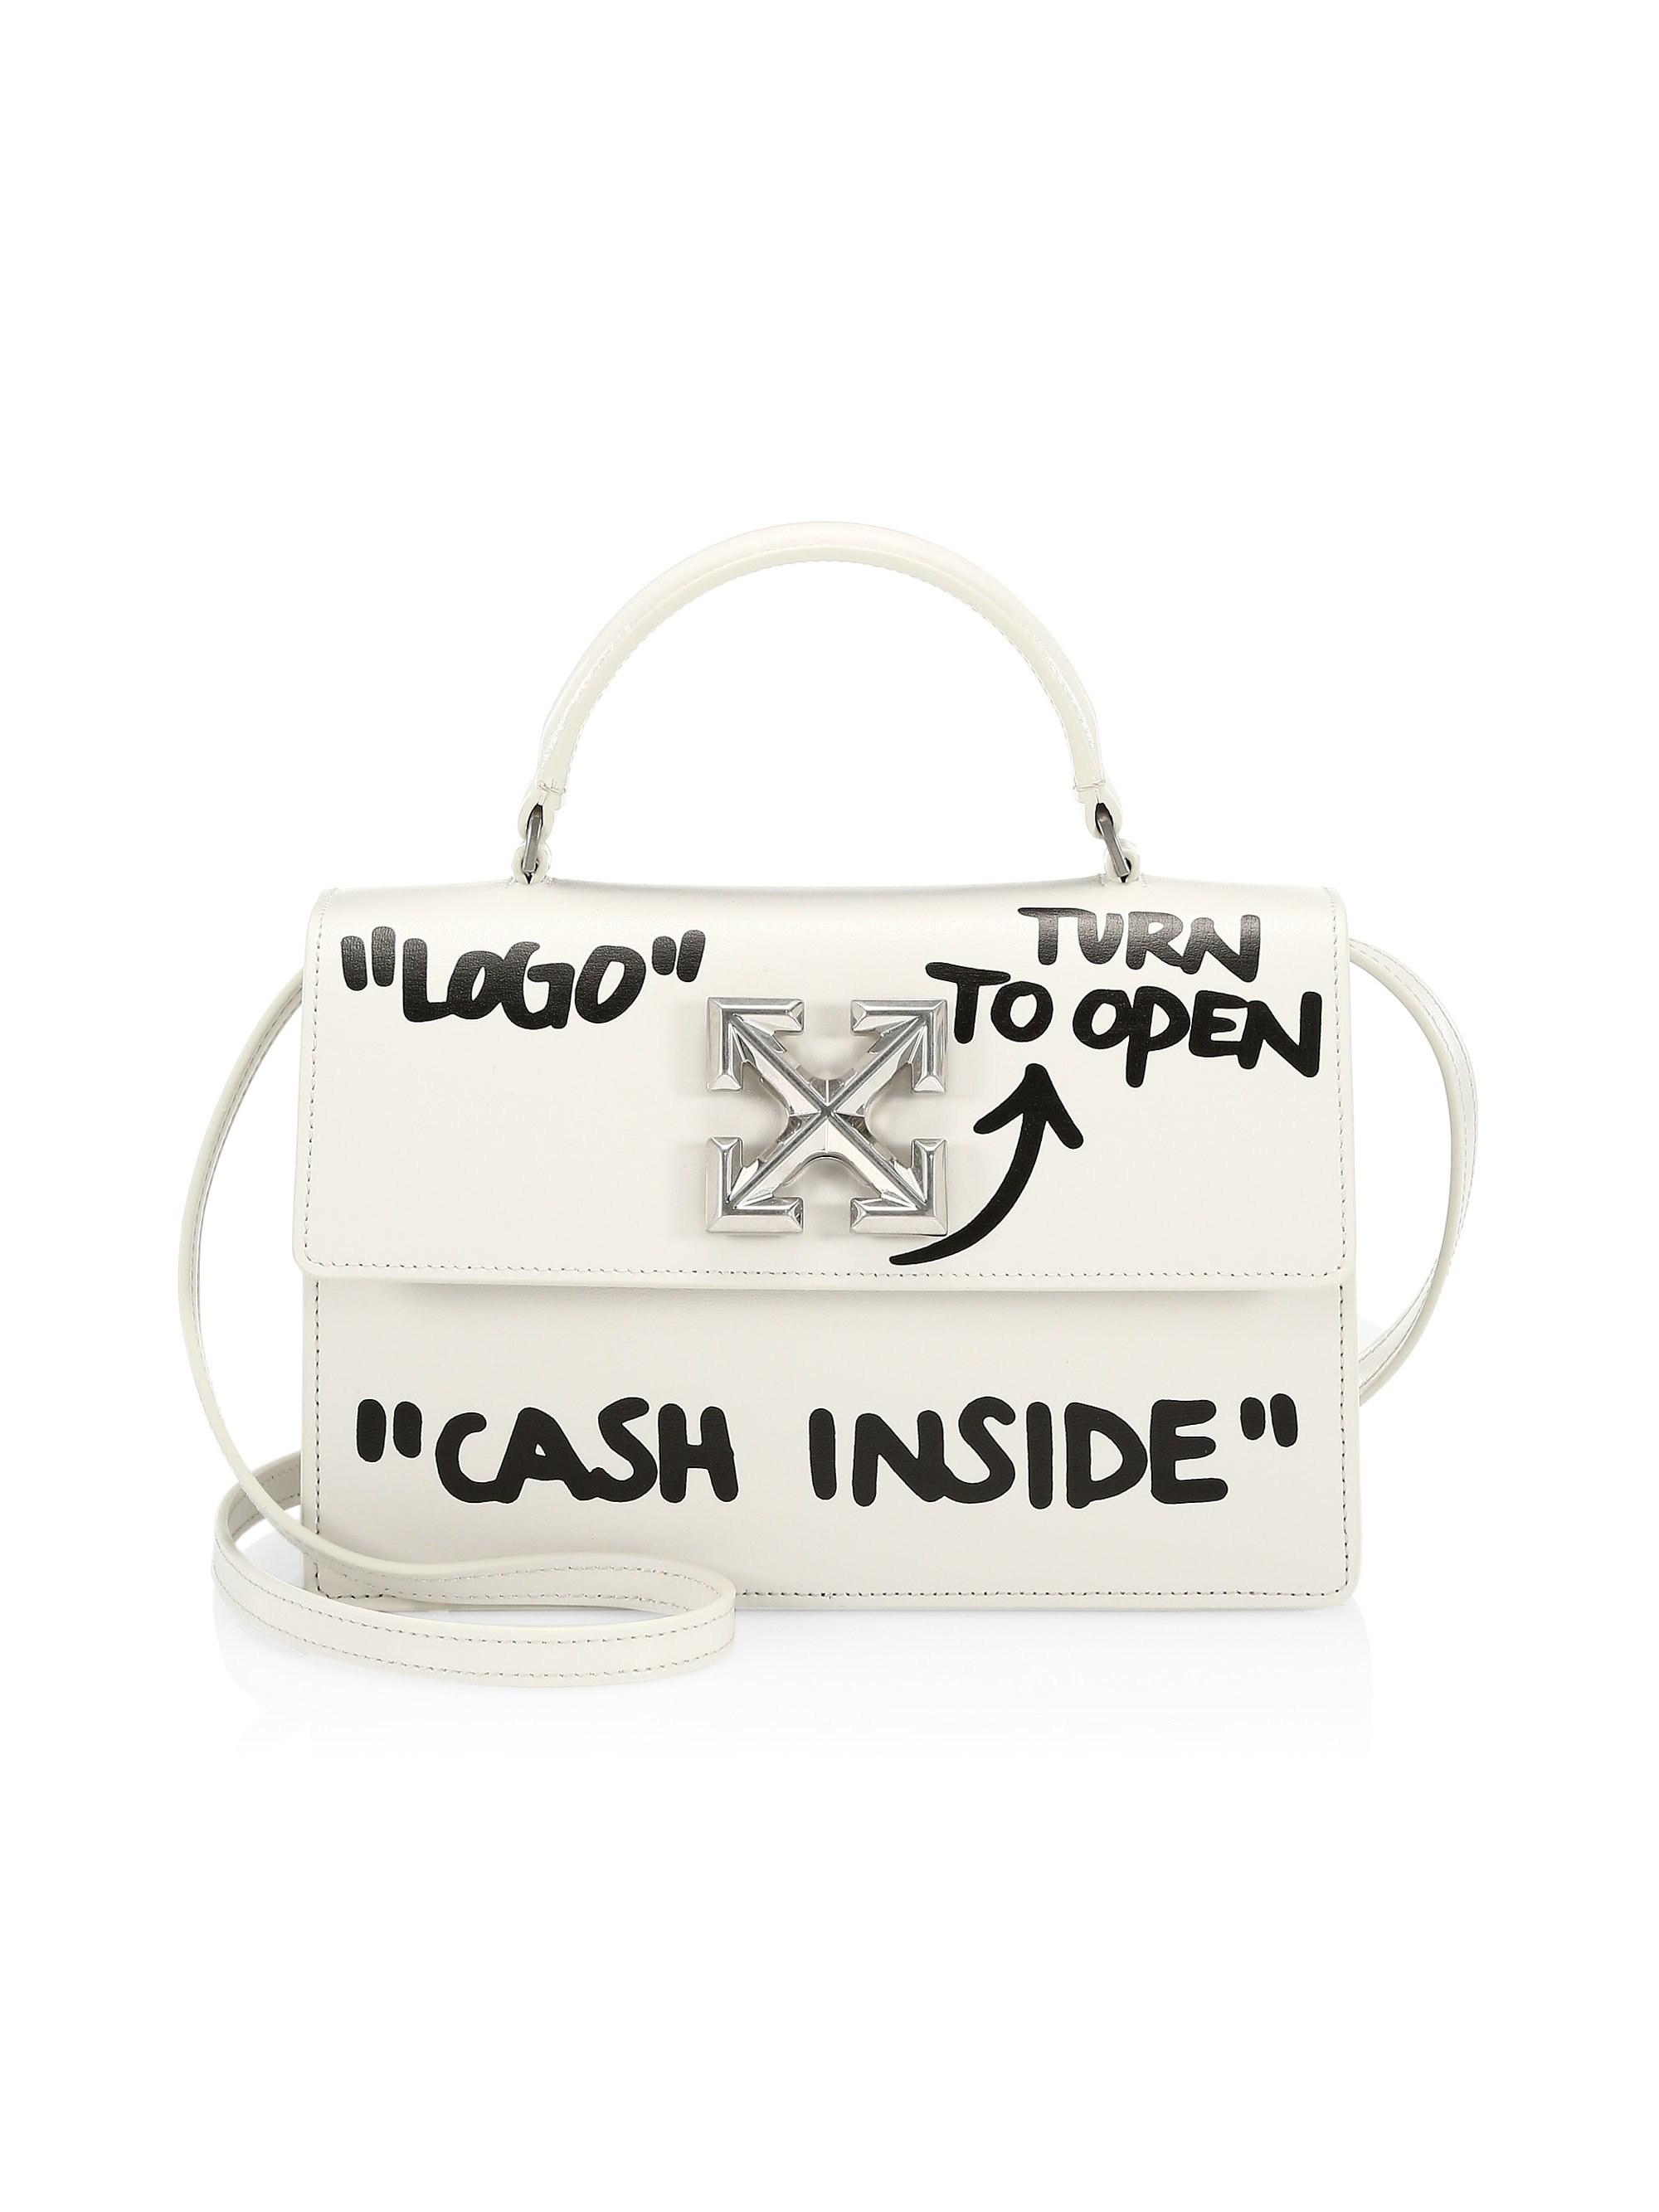 Off-White c/o Virgil Abloh Jitney 1.4 Cash Inside Leather Top Handle Bag in White - Lyst